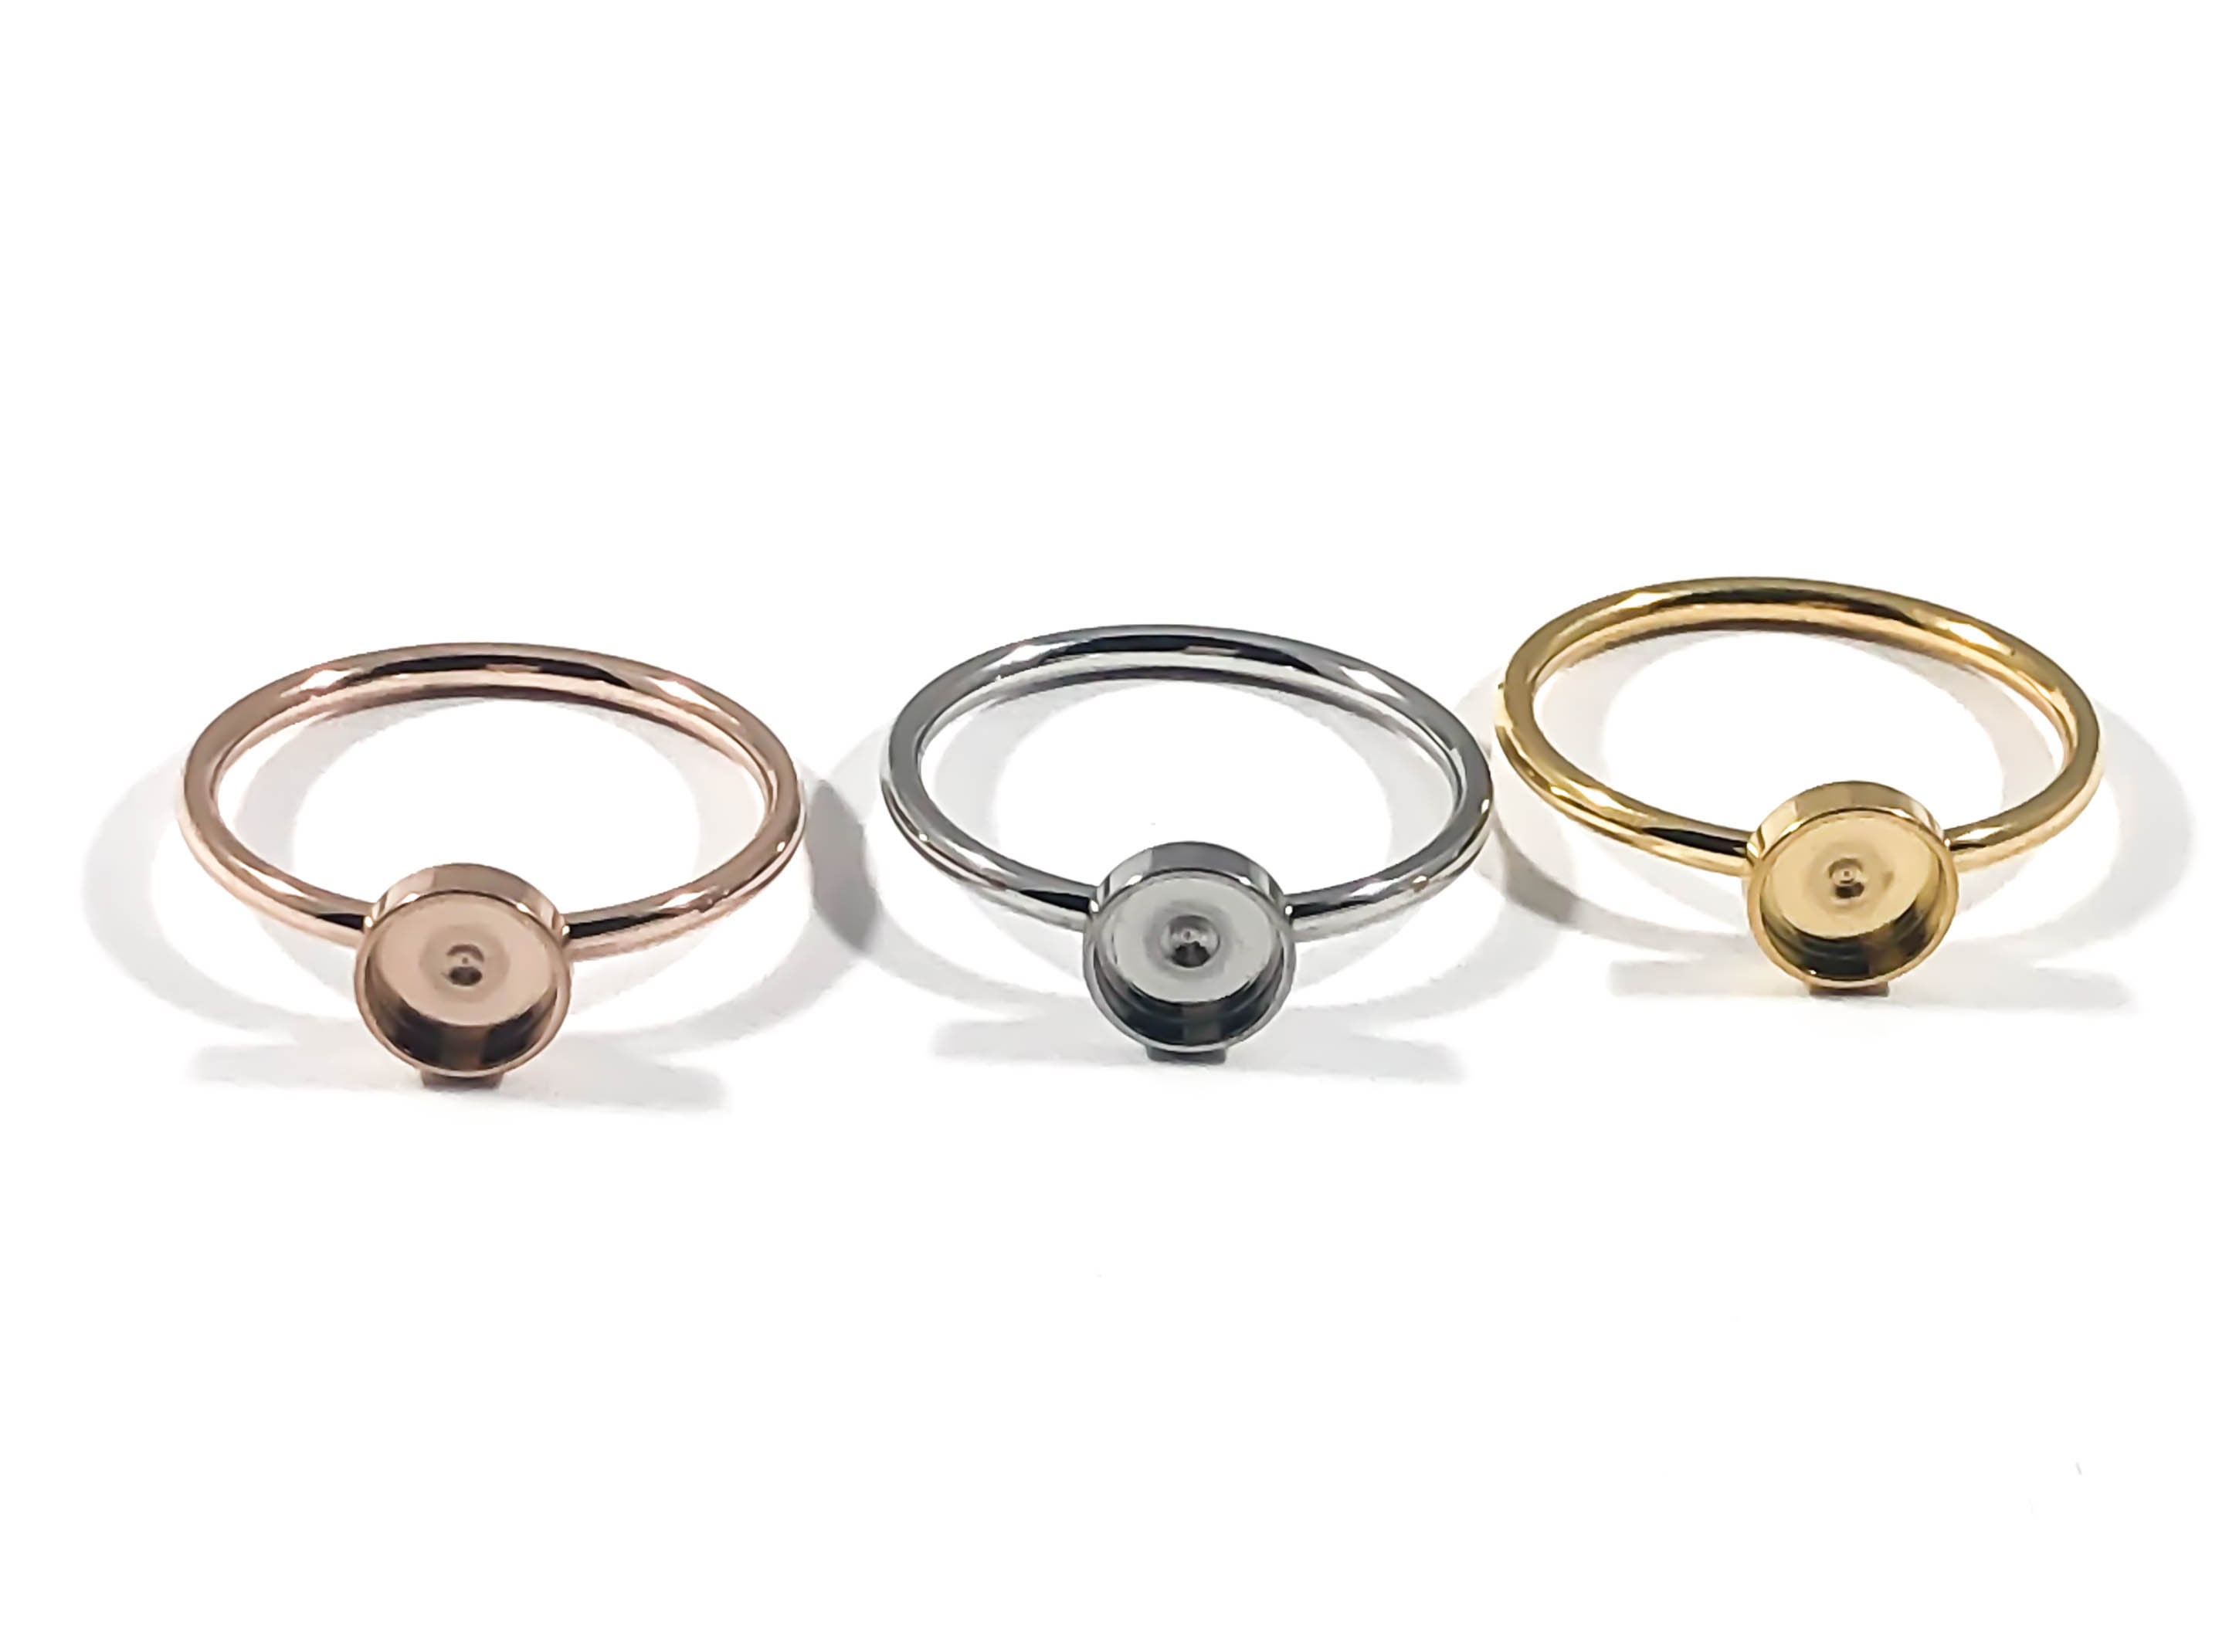 Ring Blanks-2mm Comfort Fit-stacking Rings-stainless Steel 